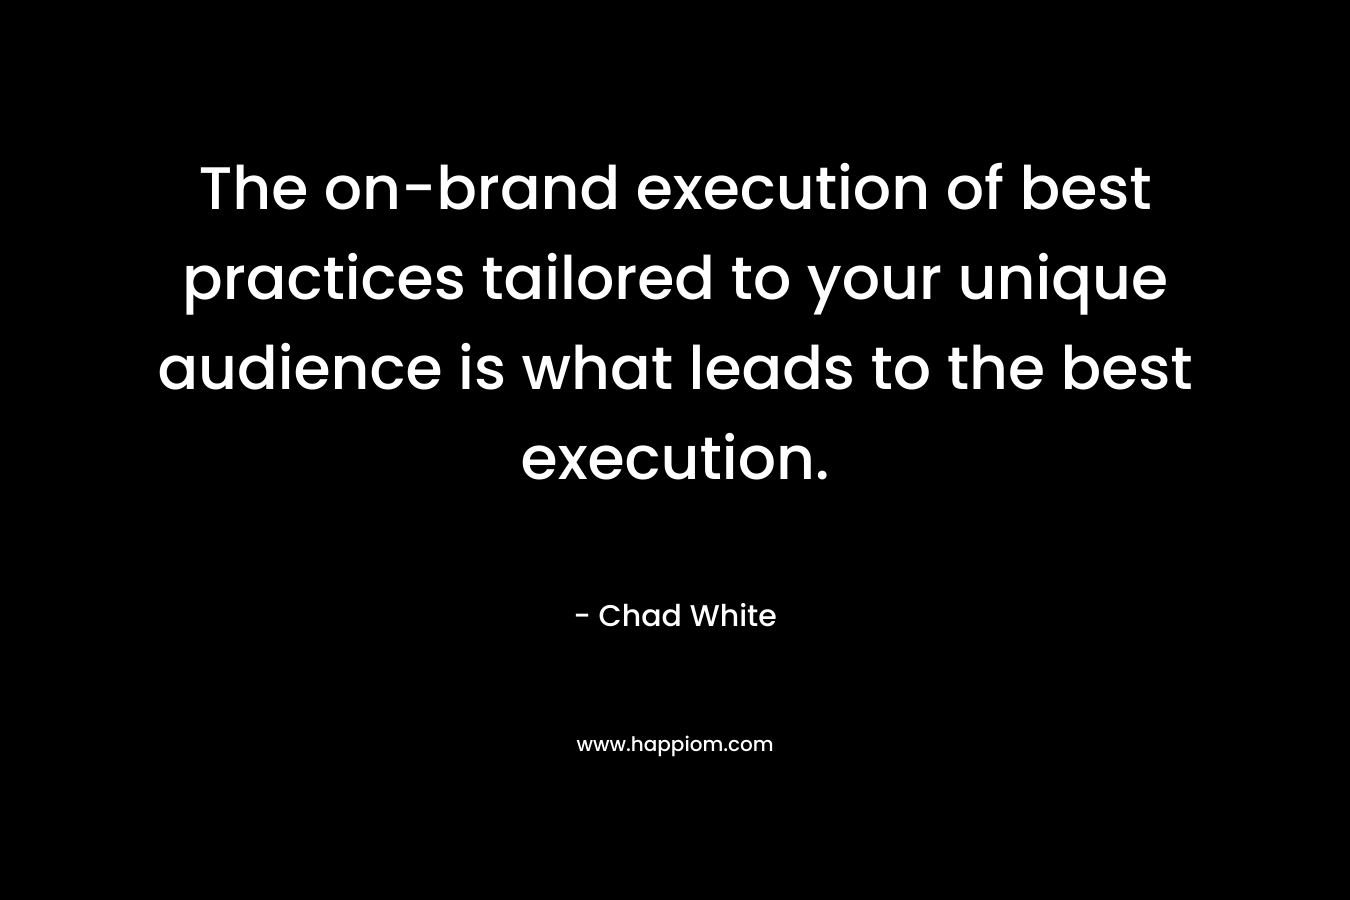 The on-brand execution of best practices tailored to your unique audience is what leads to the best execution. – Chad White